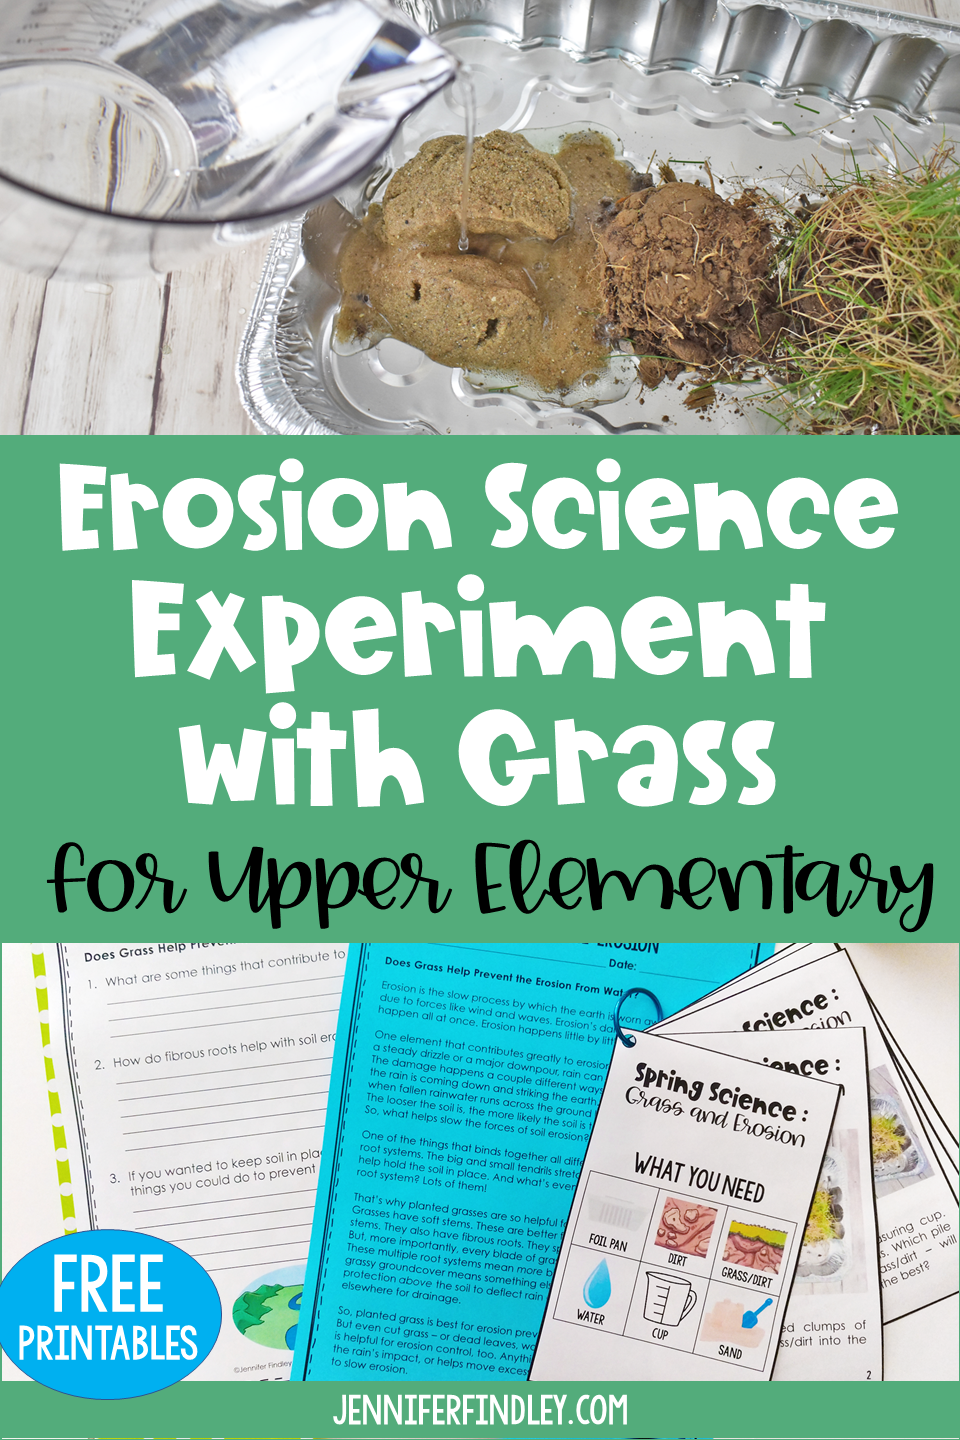 If you're looking for a way to give students a firsthand look at erosion, this is a great experiment to do so. In this science experiment, students will answer the question Does Grass Help Prevent the Erosion From Water?